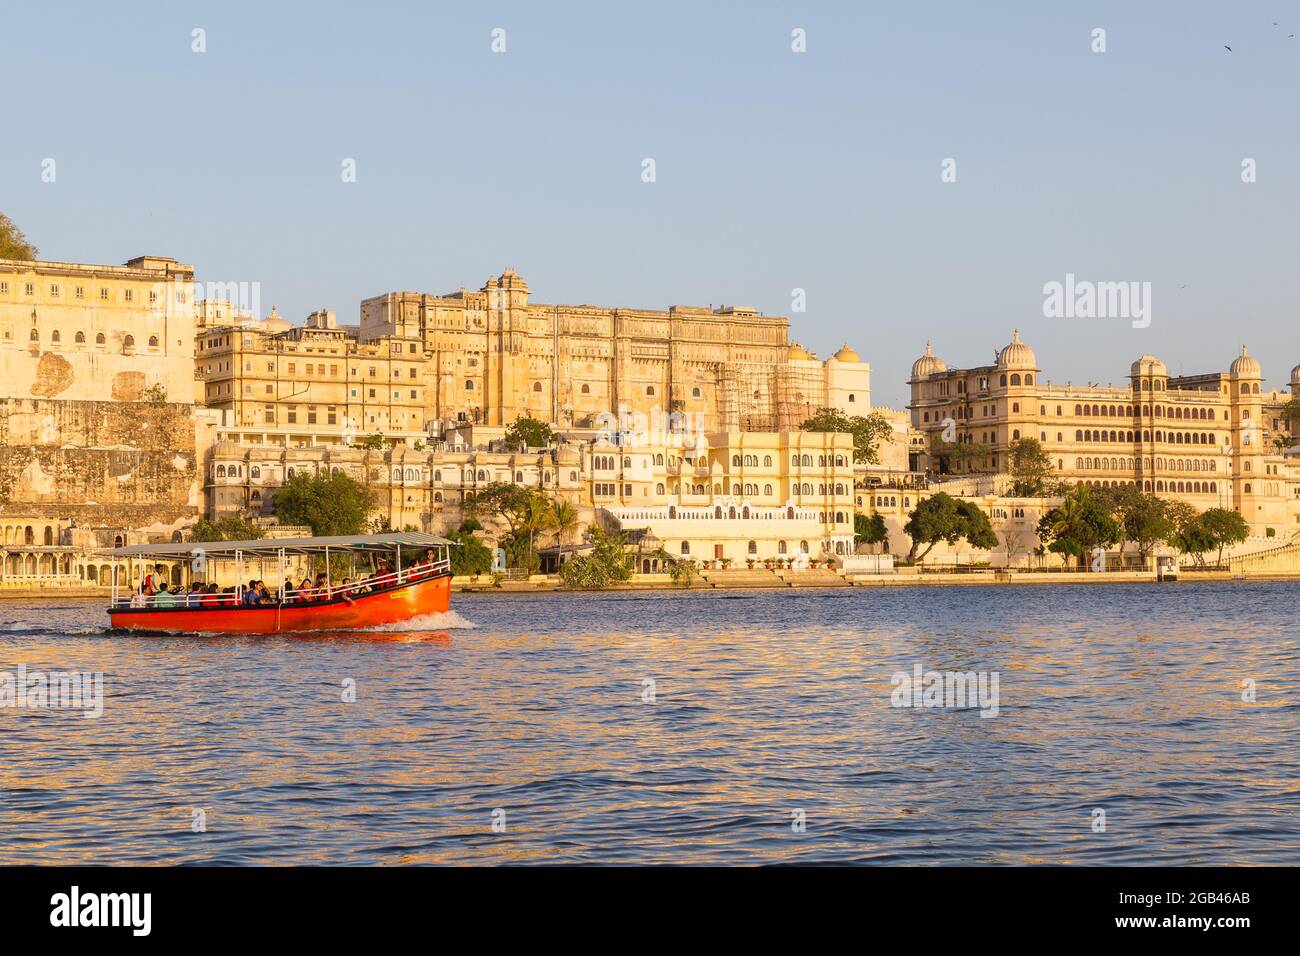 UDAIPUR, INDIA - 20TH MARCH 2016: Part of the city palace in Udaipur, India showing a boat tour on Lake Pichola. Stock Photo